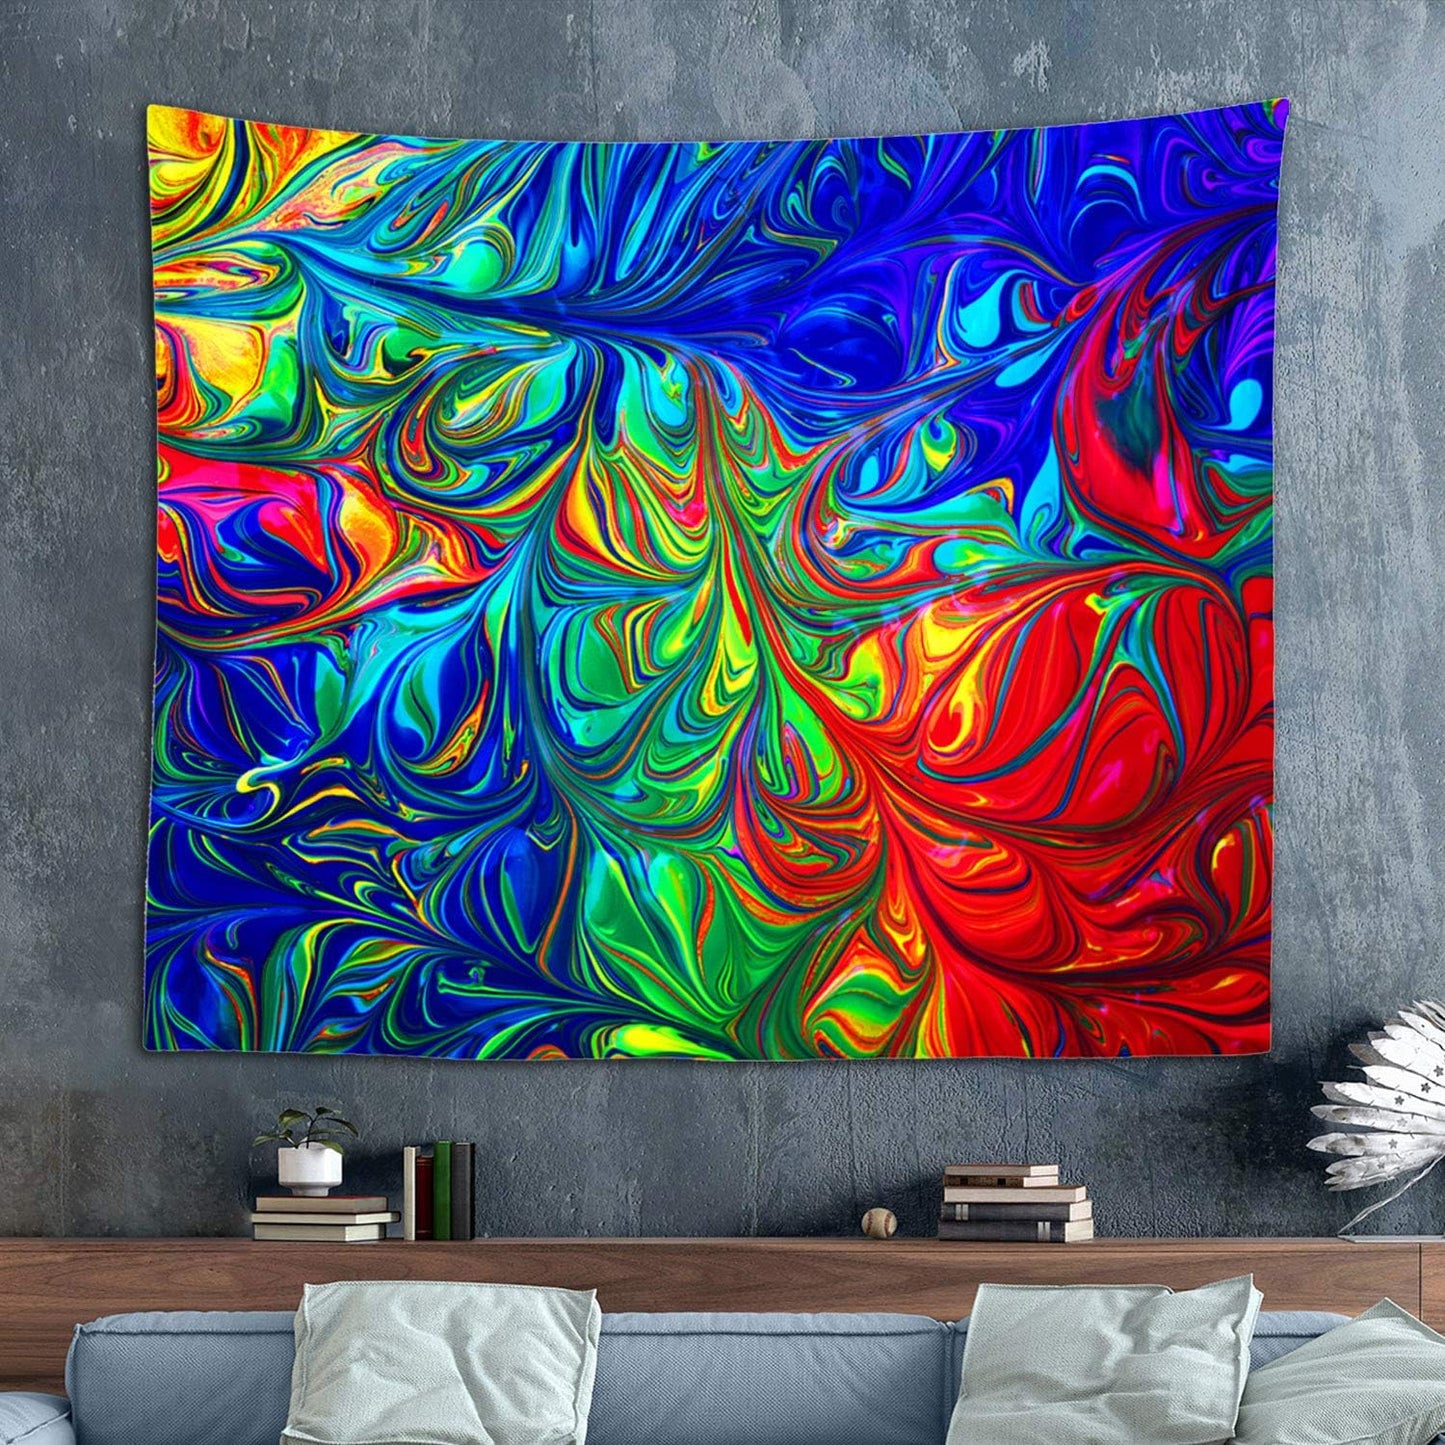 Sinsoledad Abstract Tapestry Wall Art, Large Trippy Graffiti Wall Hanging, Psychedelic Tapestry Home Decor, Cool Hippie Tapestry for bedroom aesthetic